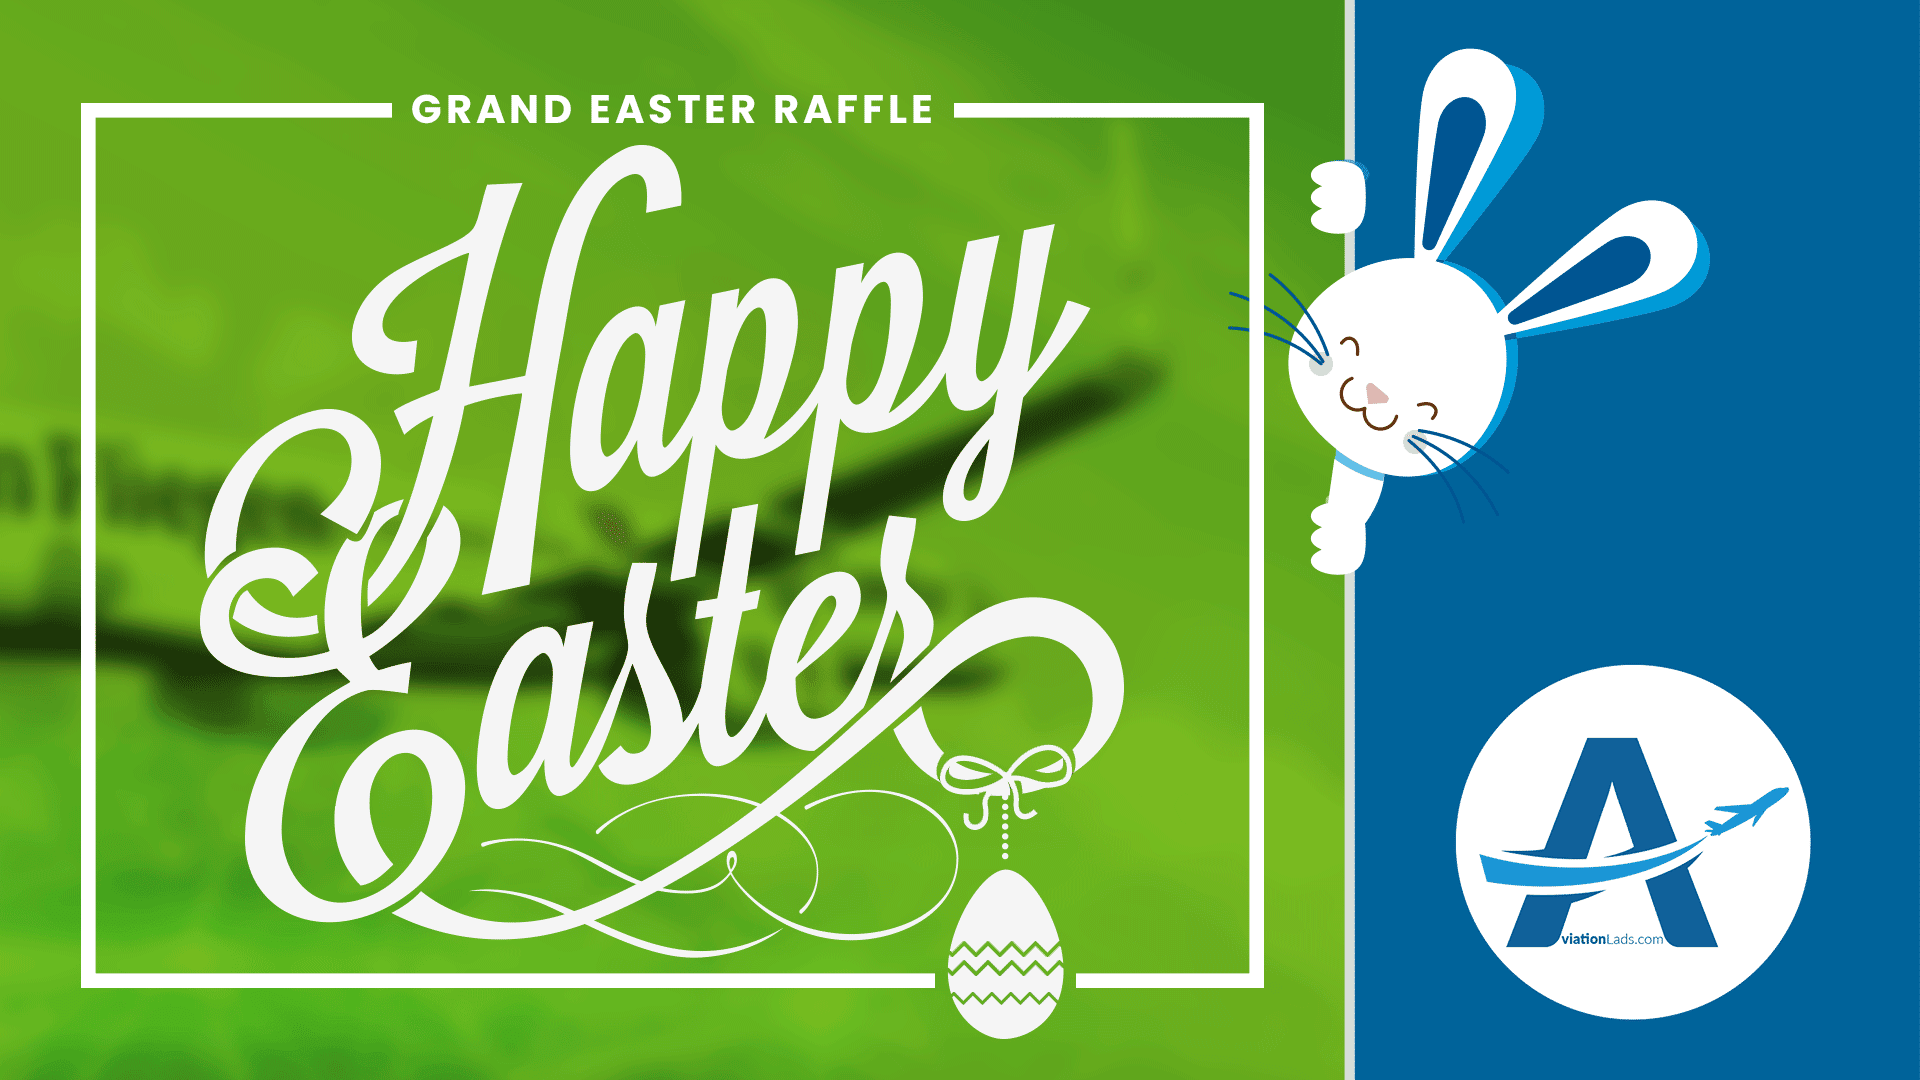 [CONTEST] GRAND EASTER RAFFLE 2020